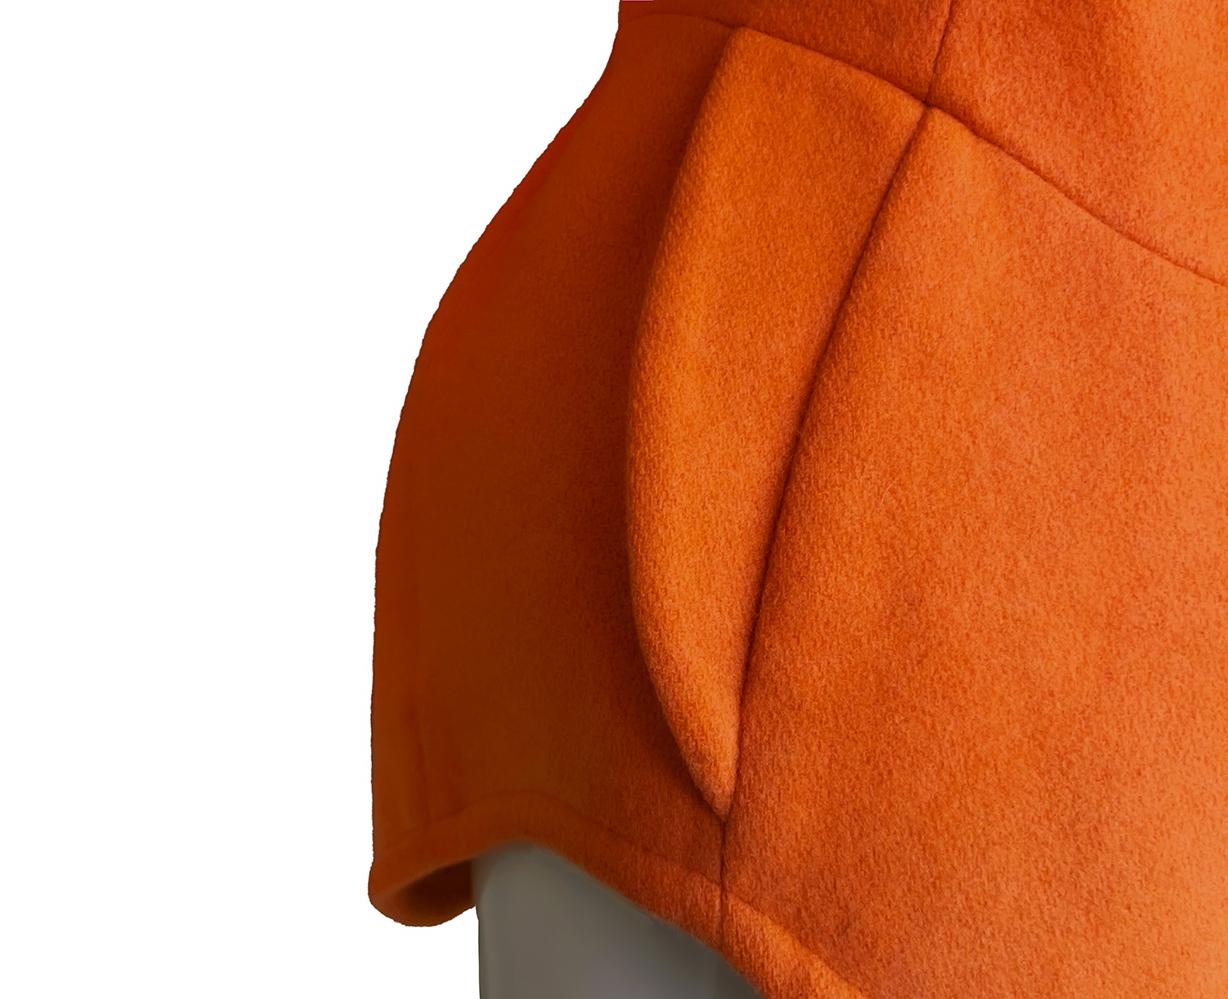 Thierry Mugler 1991 Documented Sculptural Orange Jacket with Metal Details For Sale 2